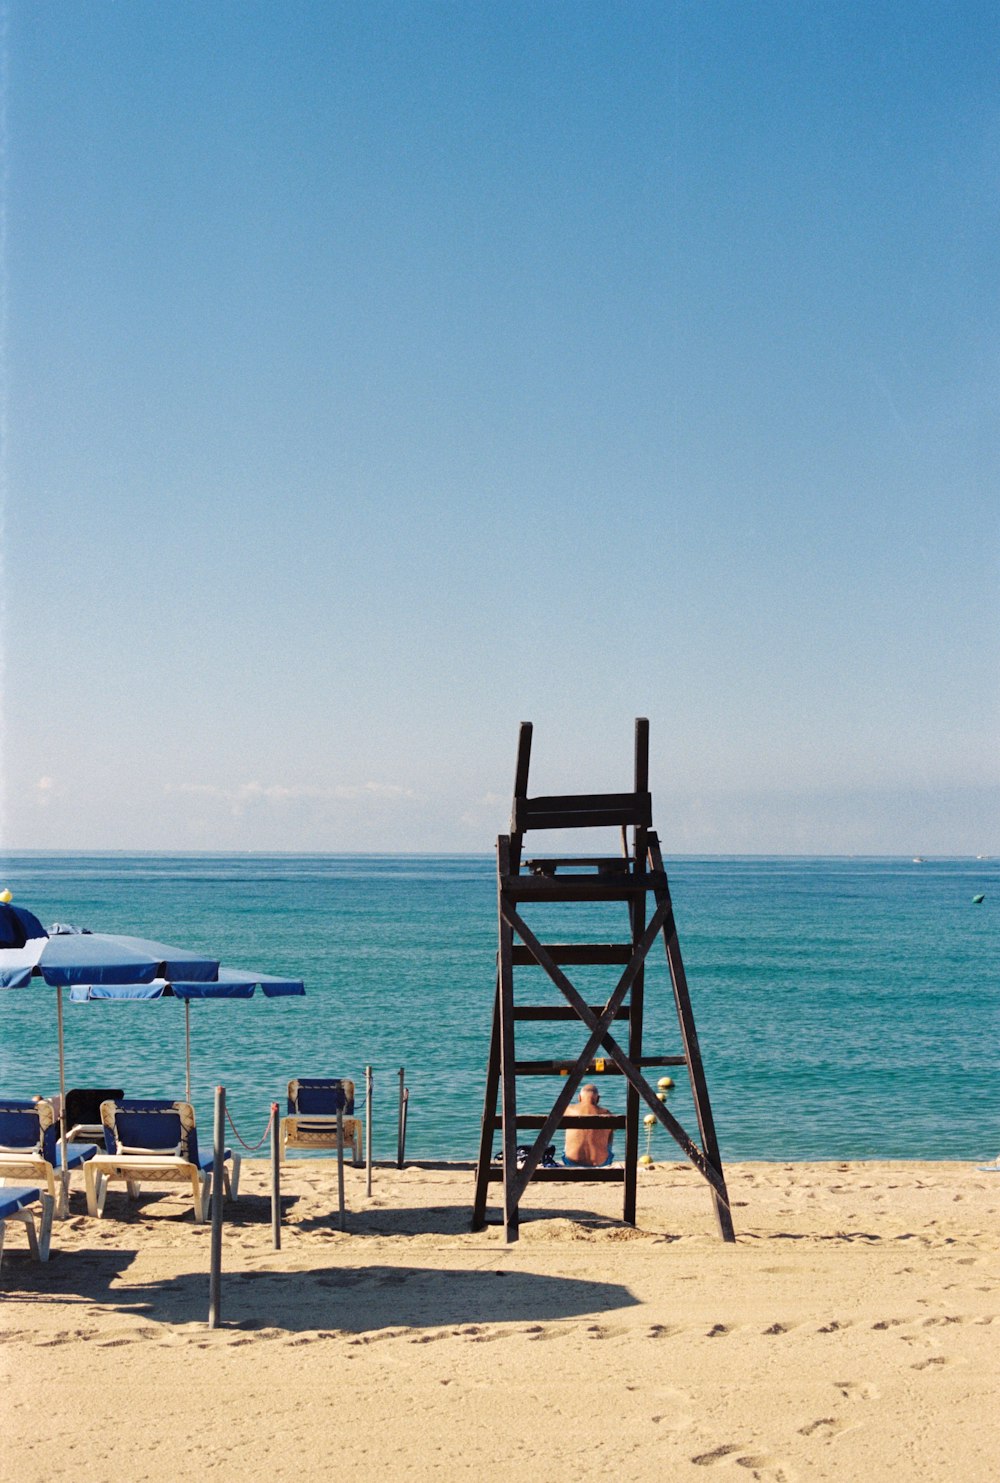 brown wooden lifeguard chair on beach during daytime